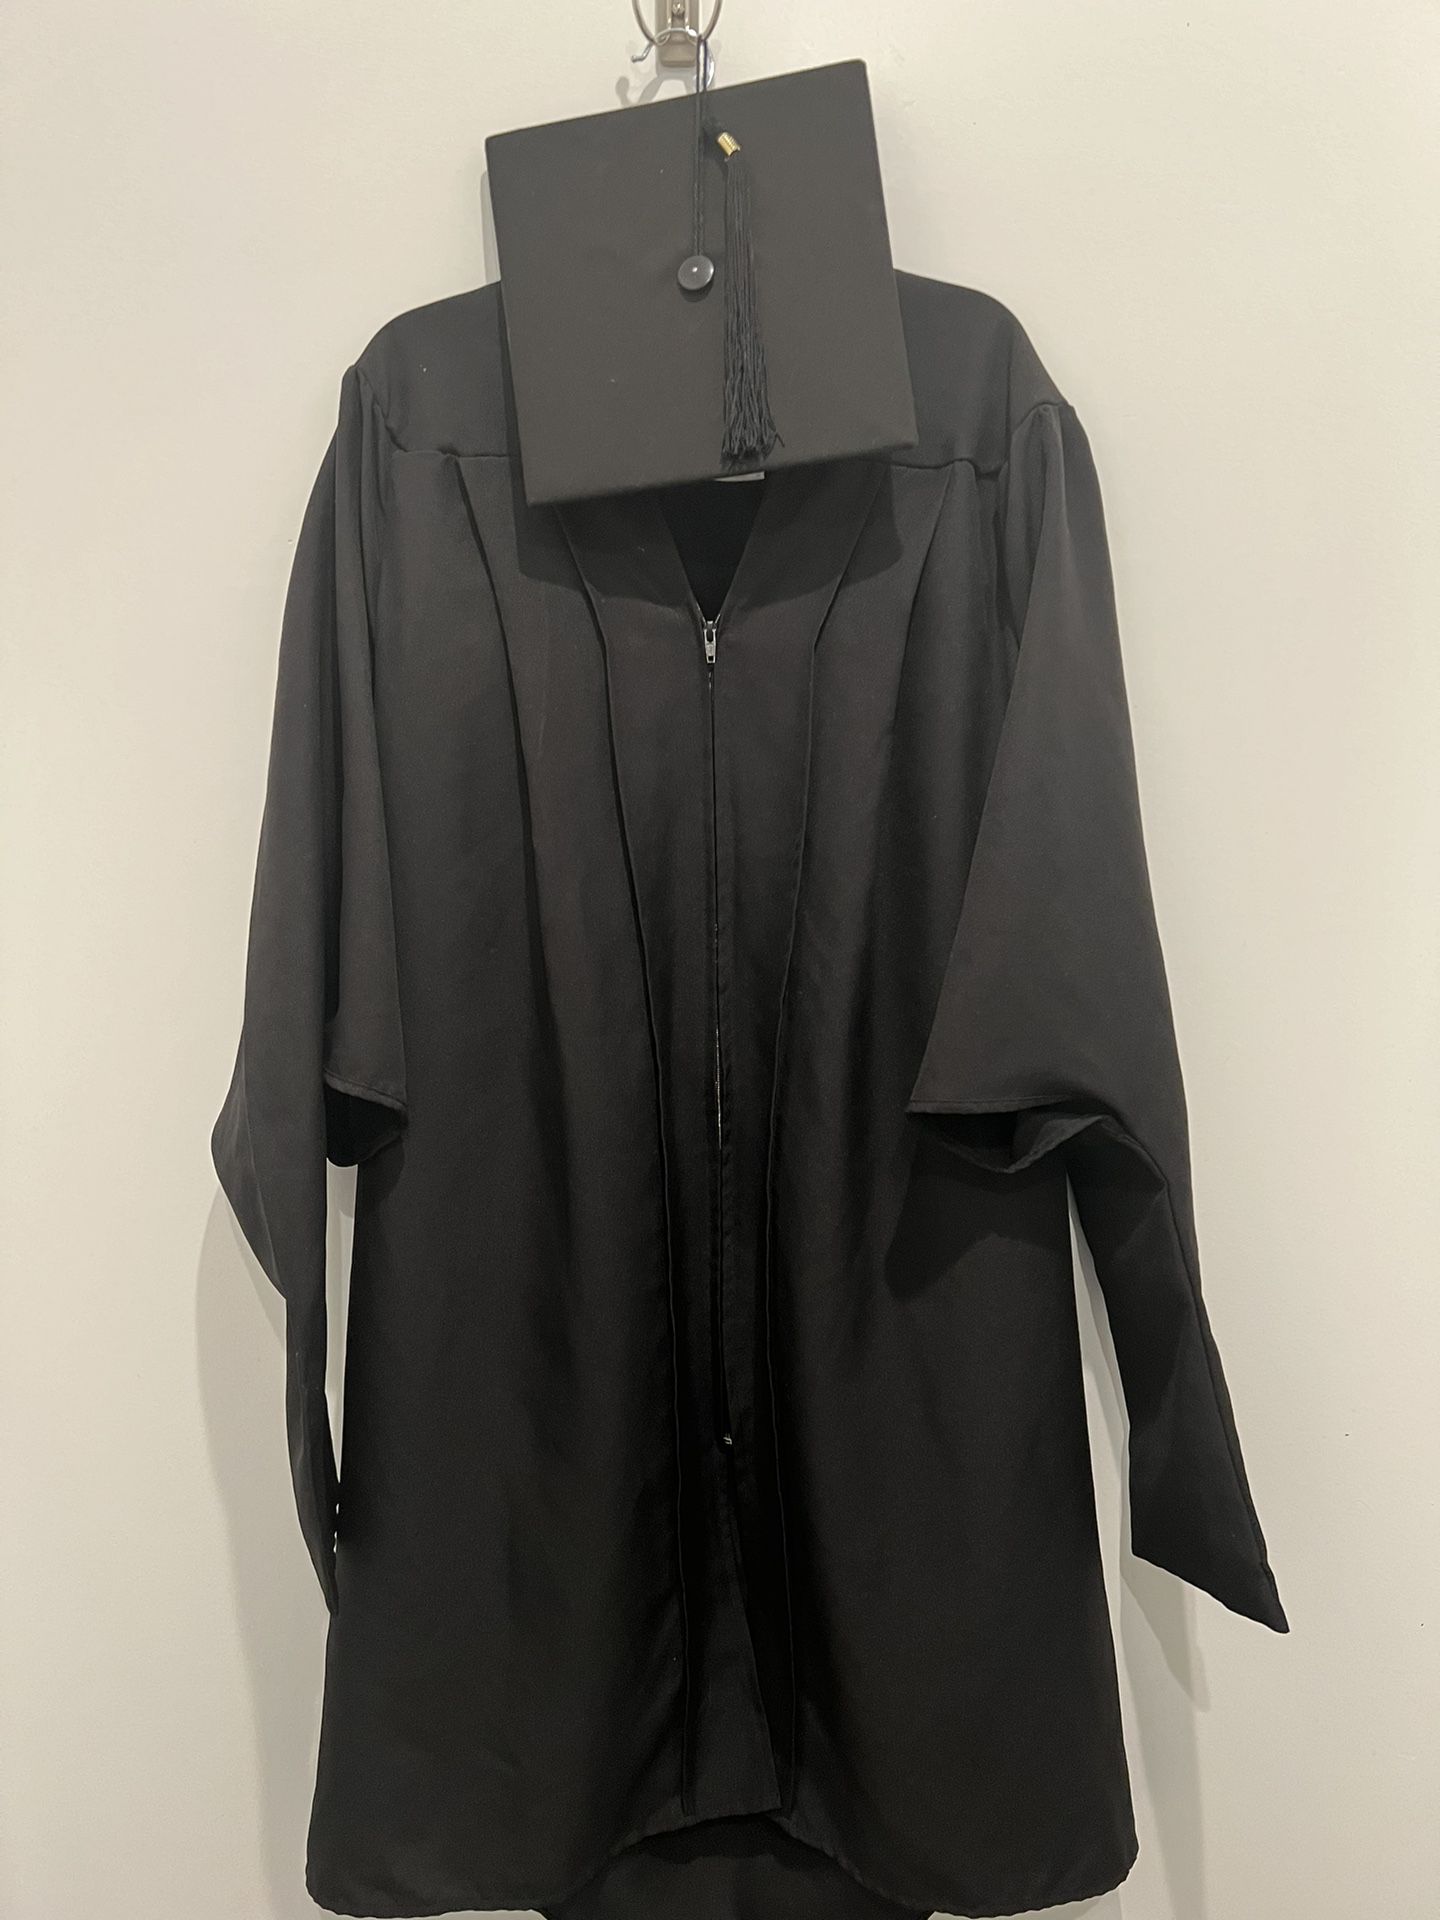 Graduation Cap and Gown - Petite size - It doesn't look like a gigantic gown